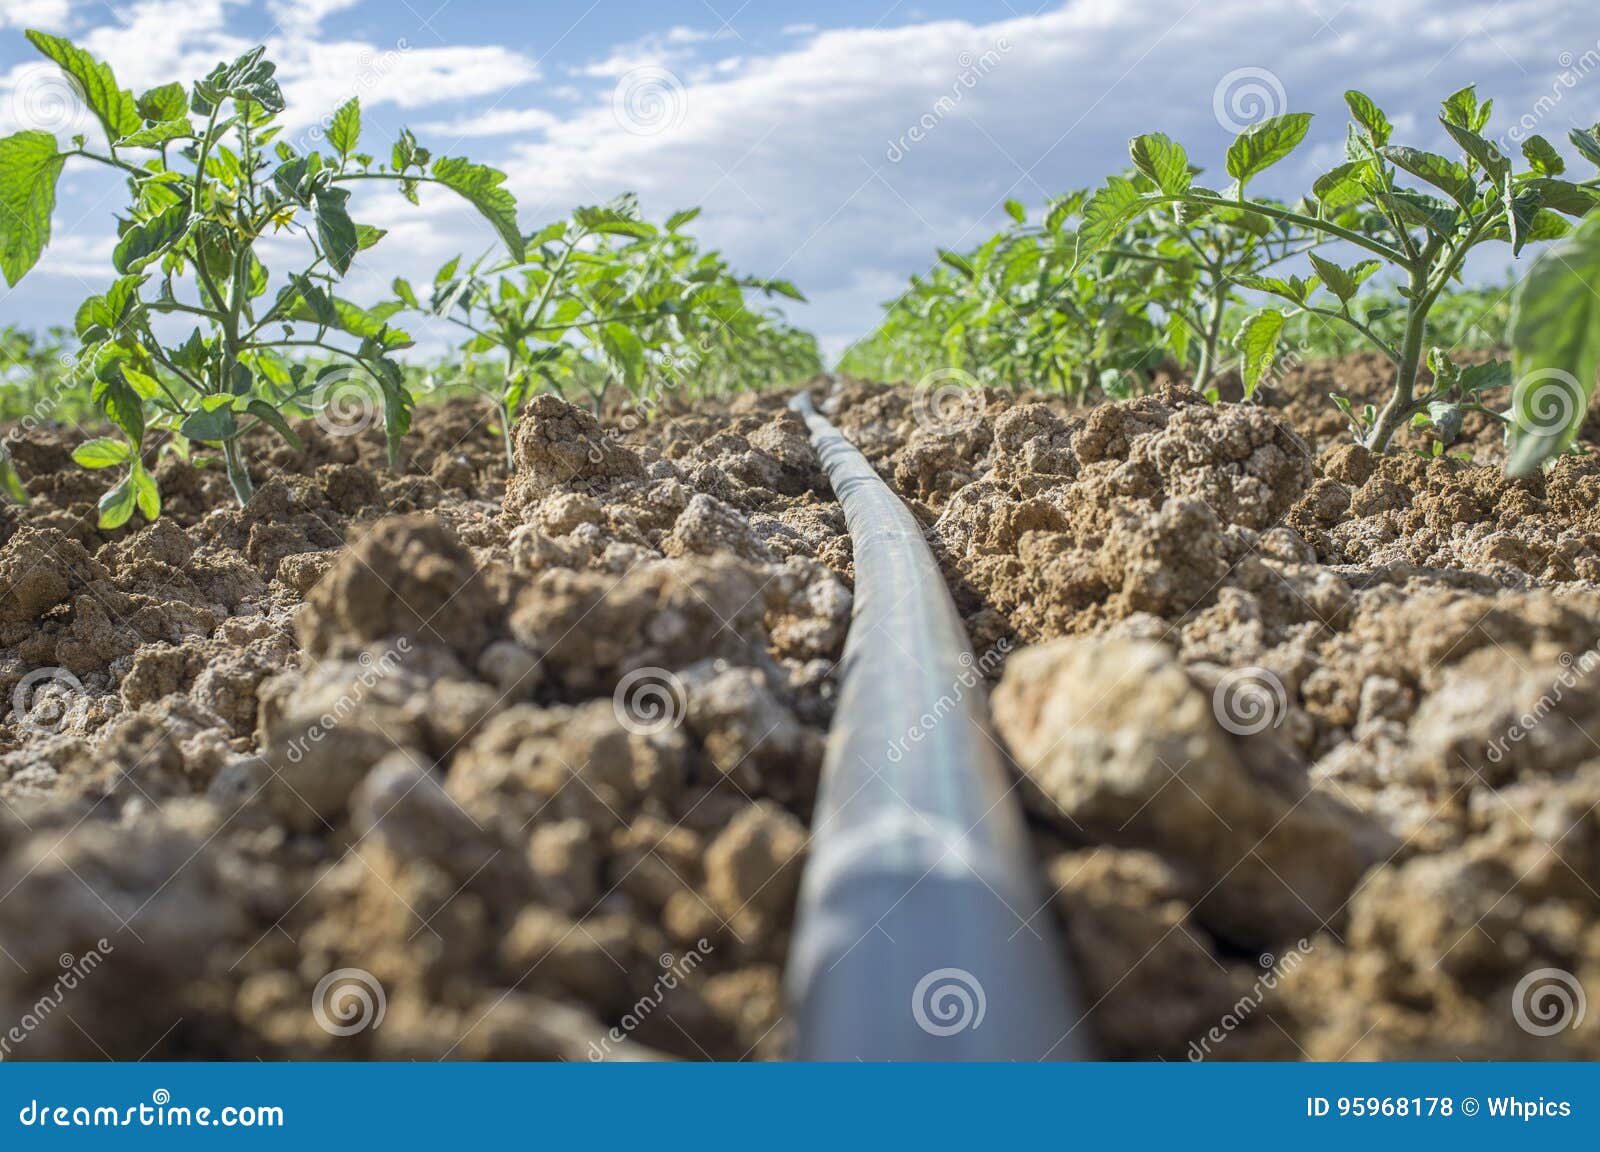 young tomato plants drip irrigation system. ground level view